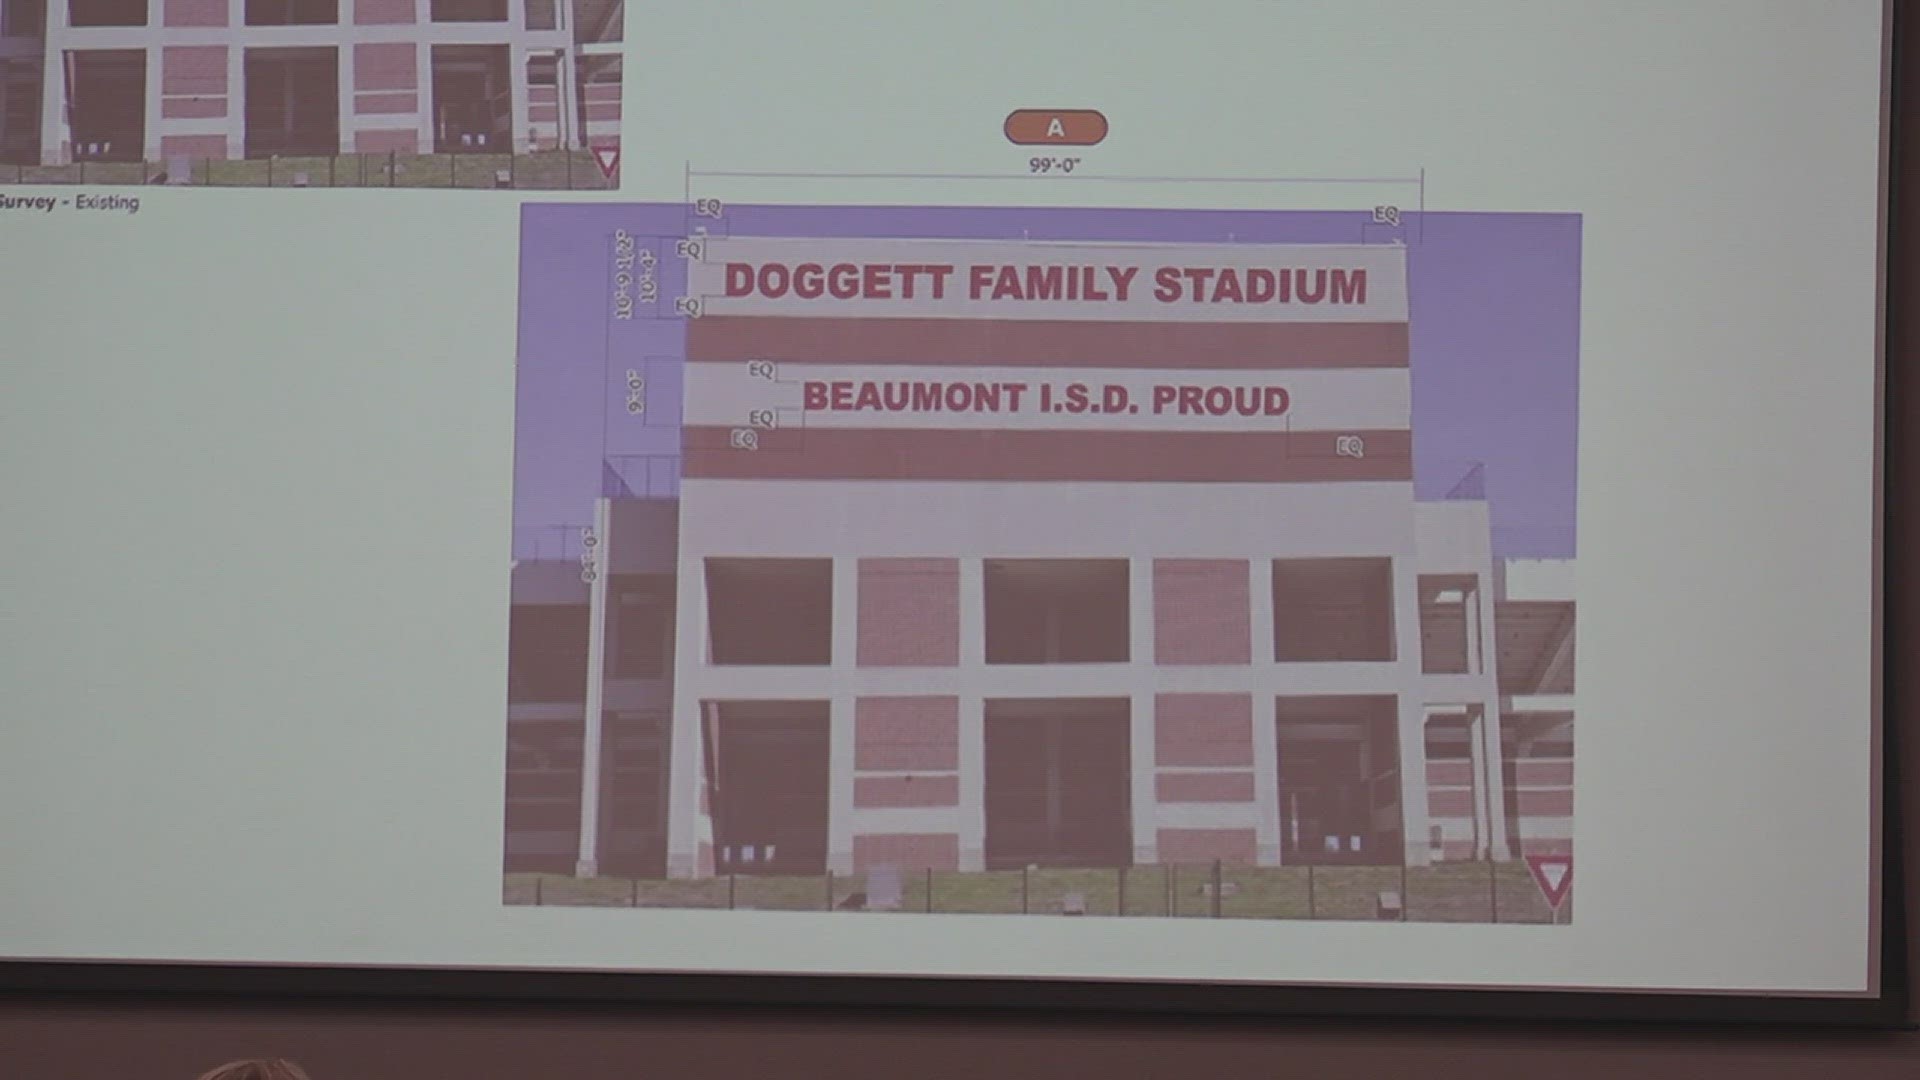 In a 6-0 vote, the board approved the name "Doggett Family Stadium" and showed a rendering of the stadium with the new name.